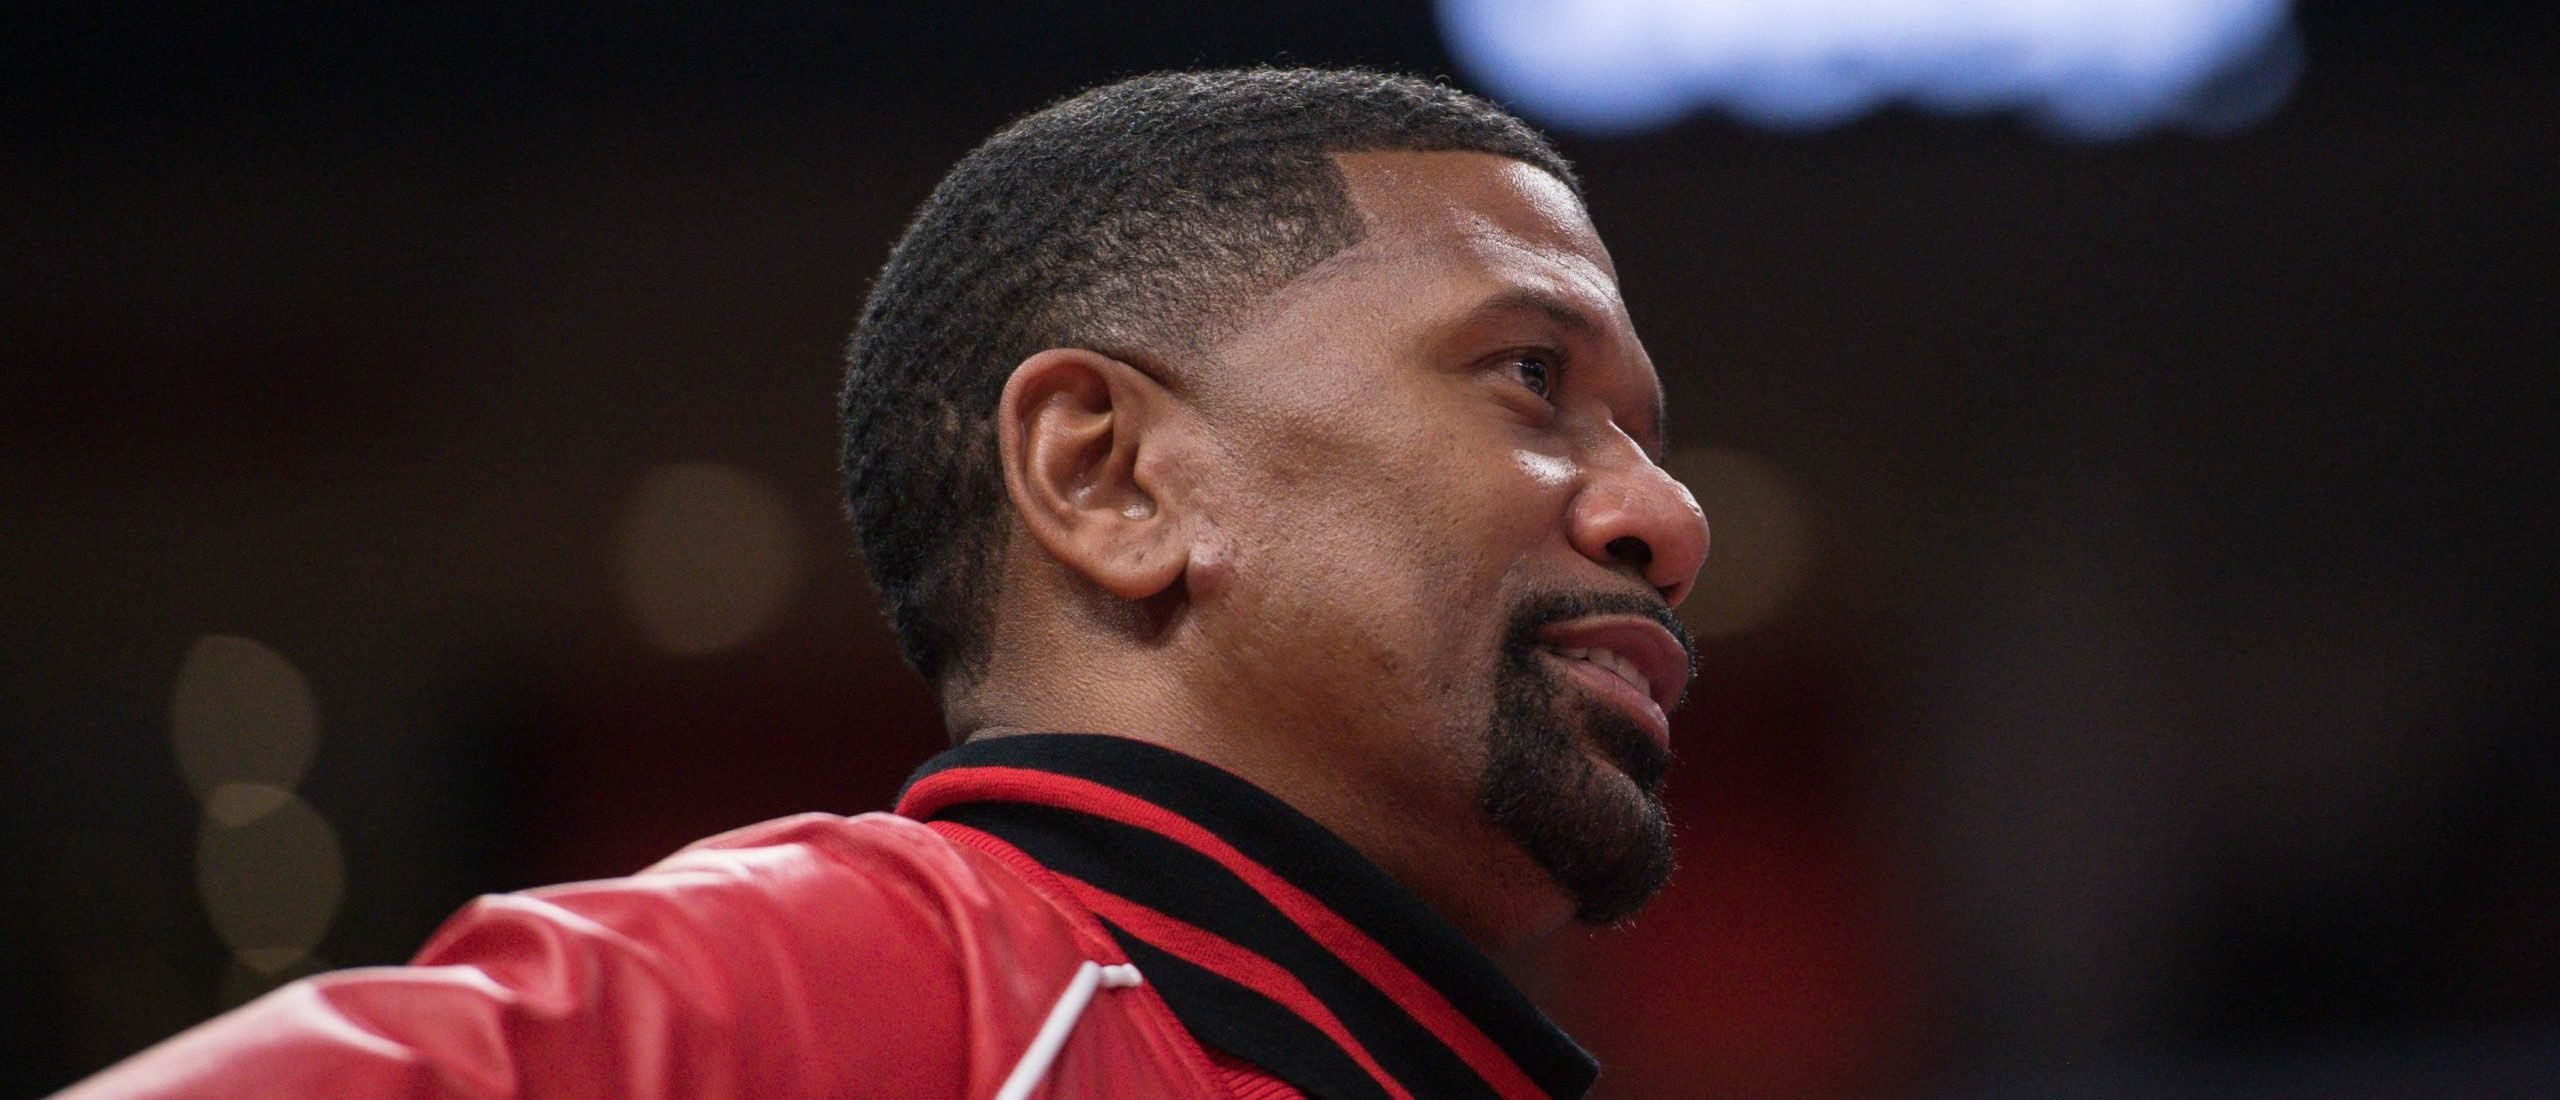 ESPN Host Jalen Rose Says ‘Mount Rushmore’ Term Is Offensive And Should Be Retired